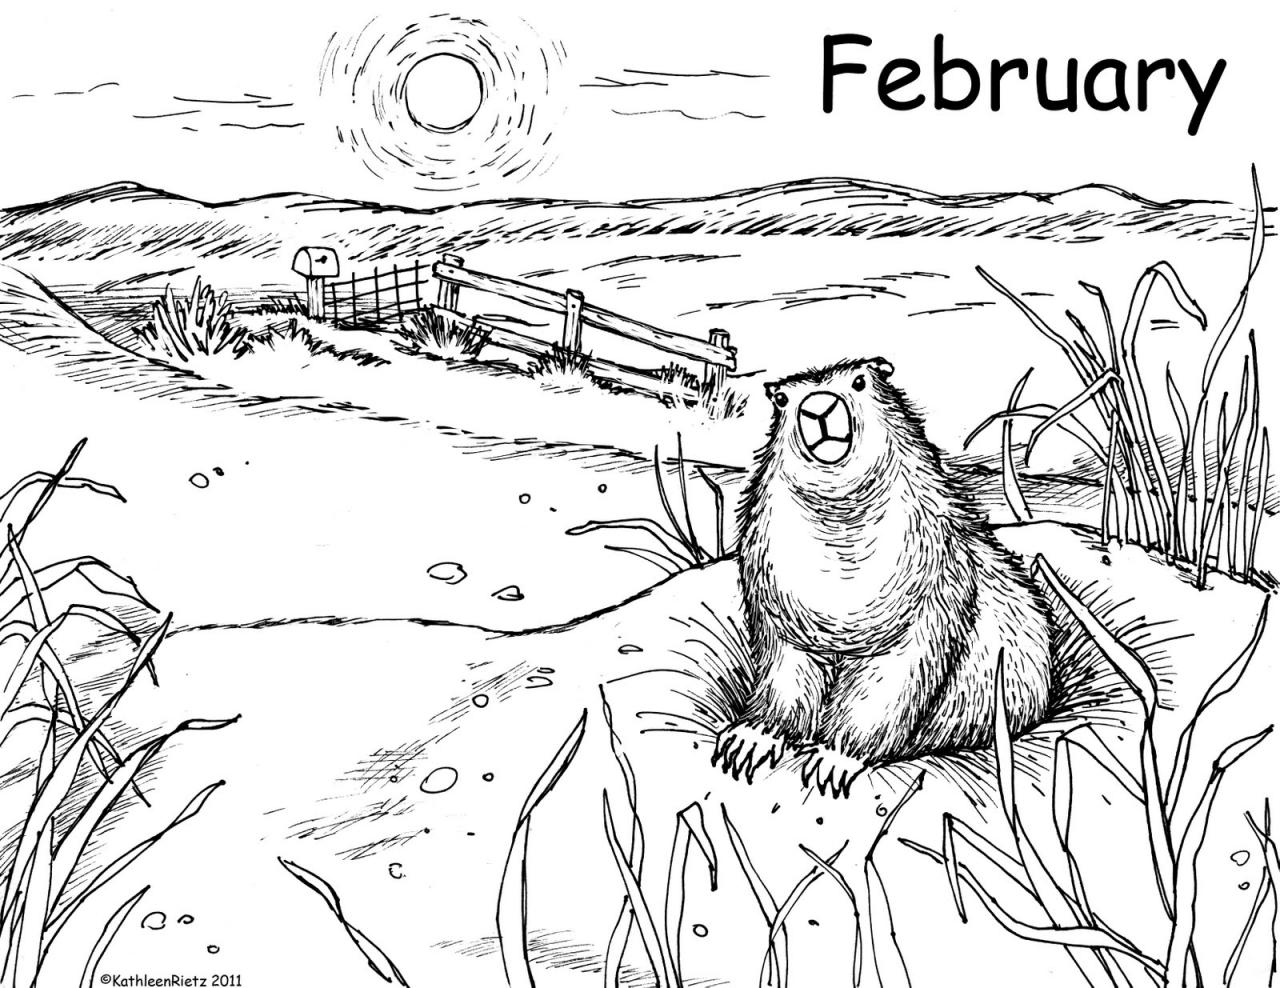 Groundhog Coloring Pages Coloring Page For Kids | Kids Coloring